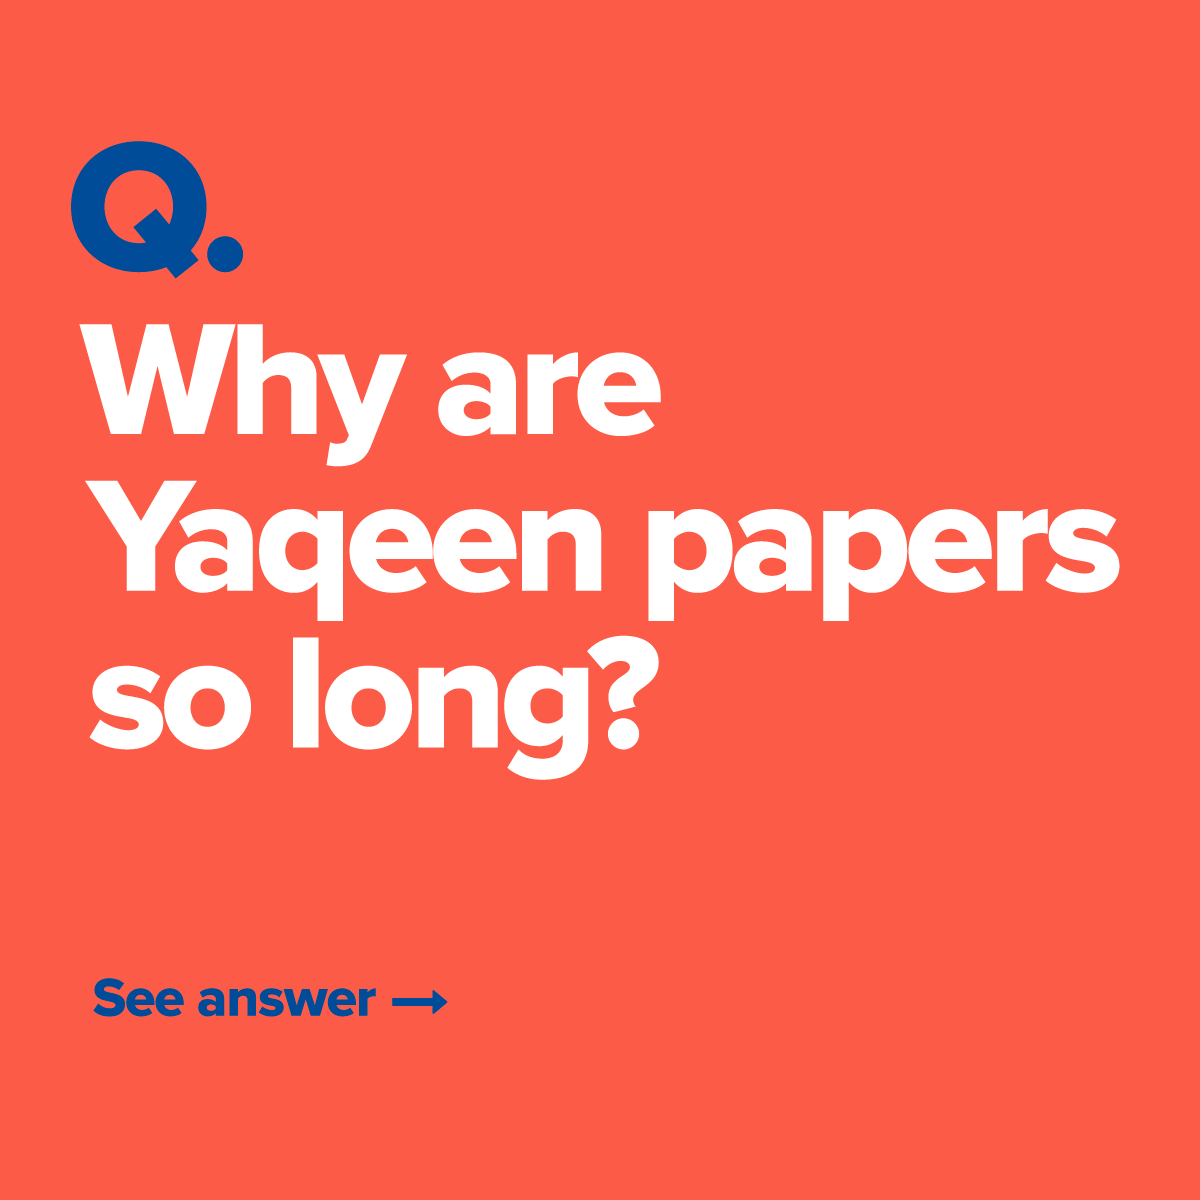 Question 3: Why are Yaqeen papers so long?